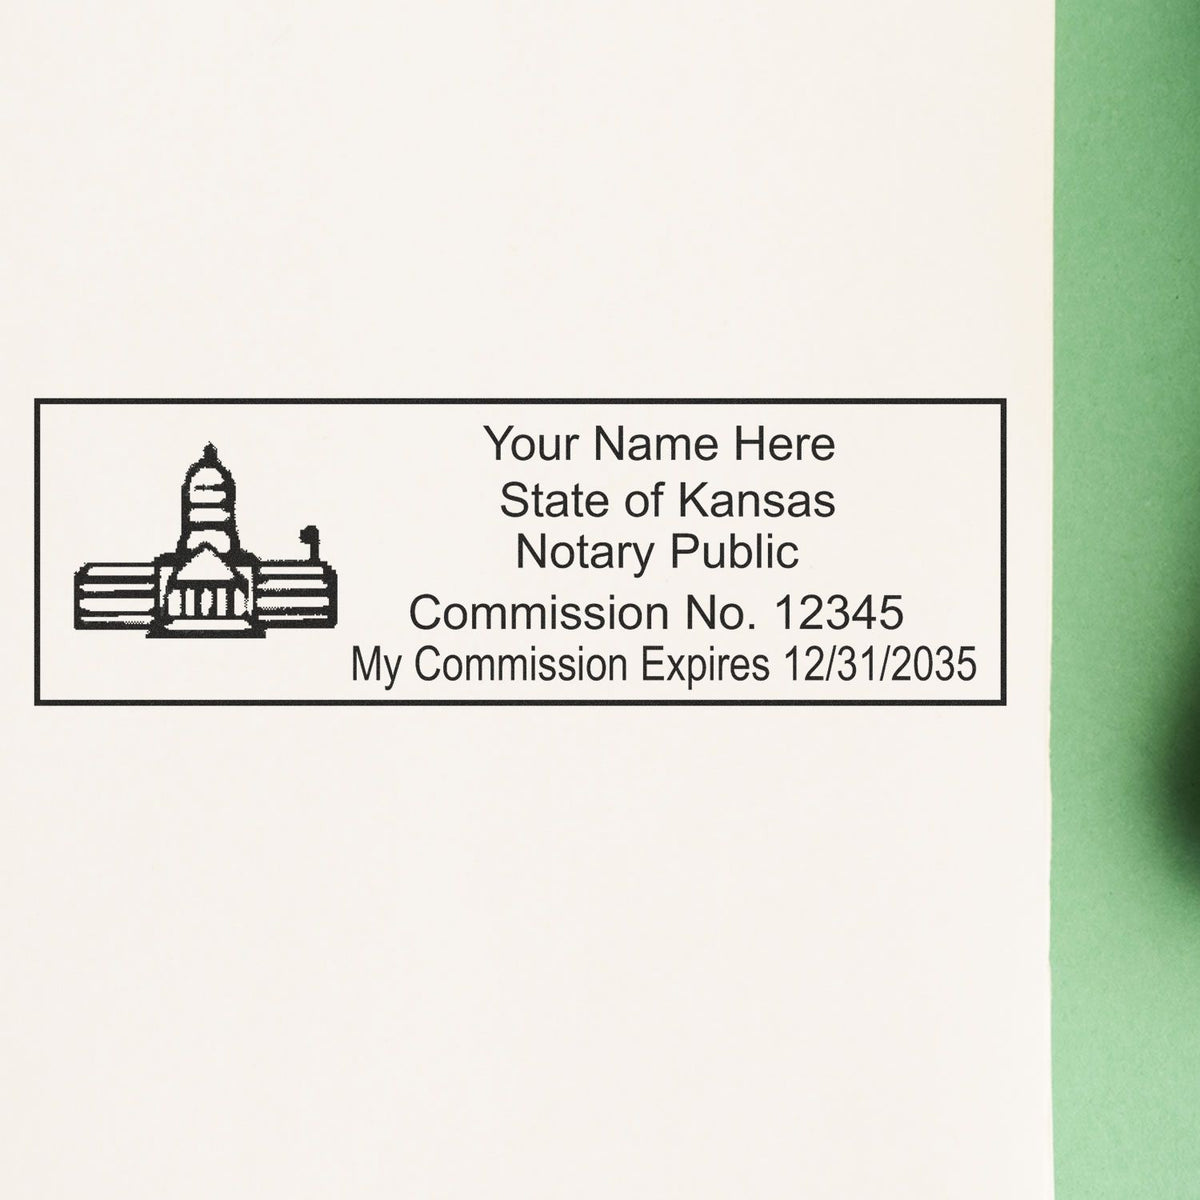 The main image for the Wooden Handle Kansas State Seal Notary Public Stamp depicting a sample of the imprint and electronic files